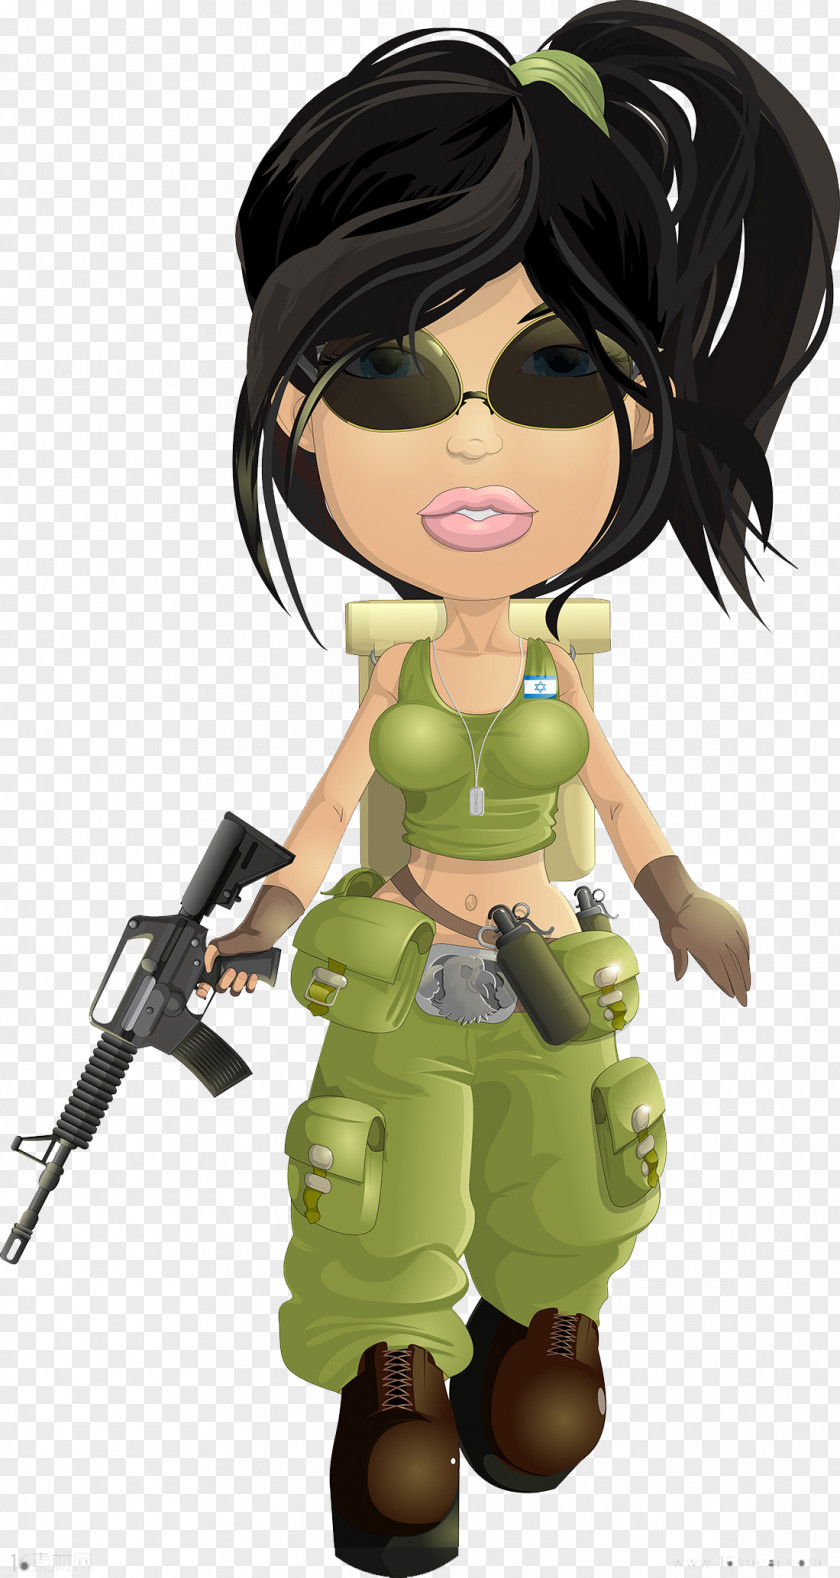 Q Version Of The Game Female Warrior Military Soldier Army PNG